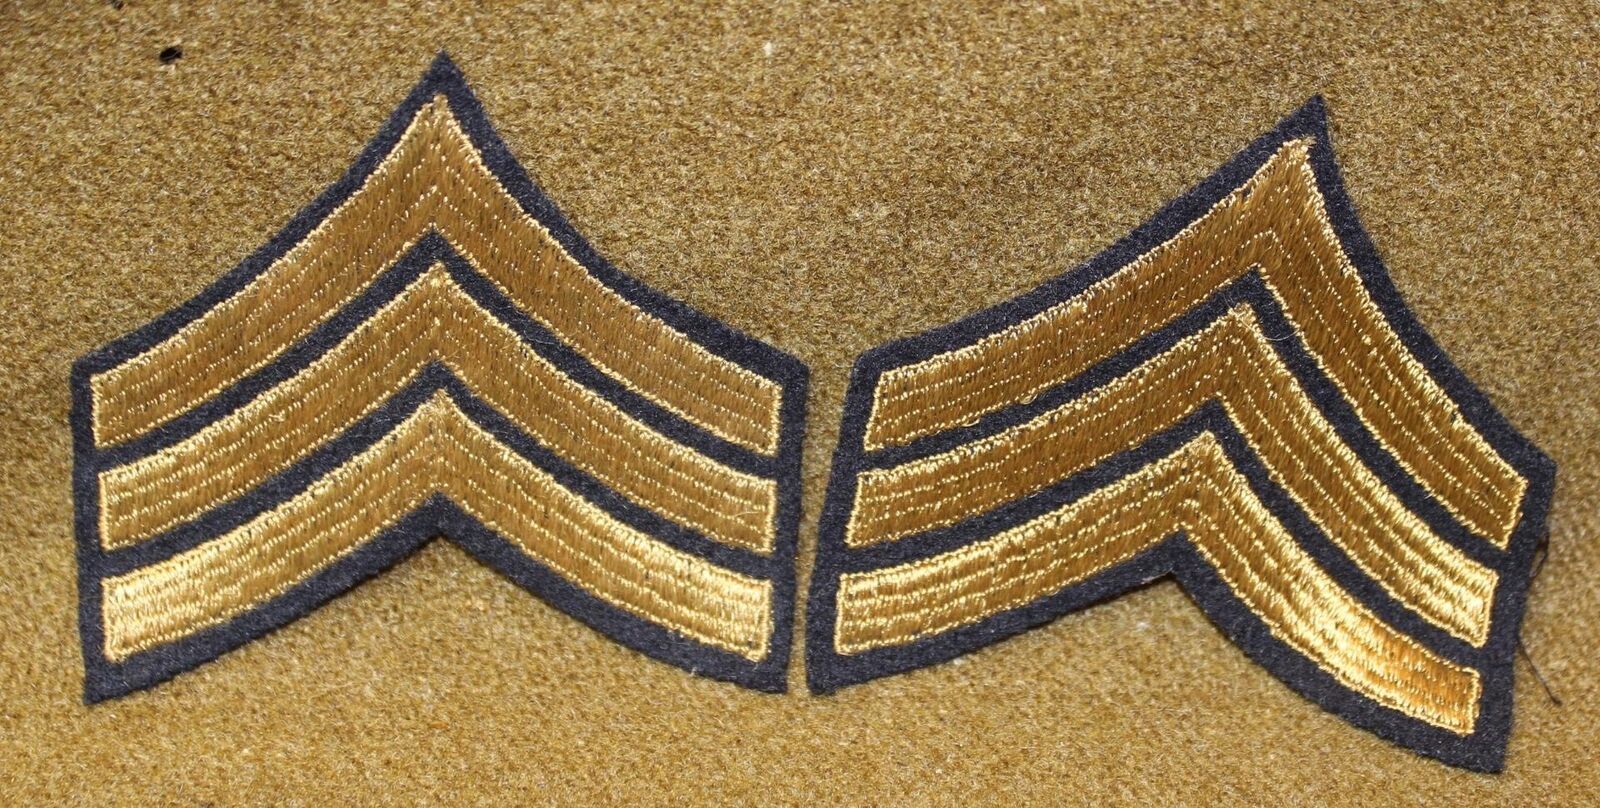 WW II US ARMY SARGEANT FELT GOLD EMBROIDERED RANK CHEVRON PATCH